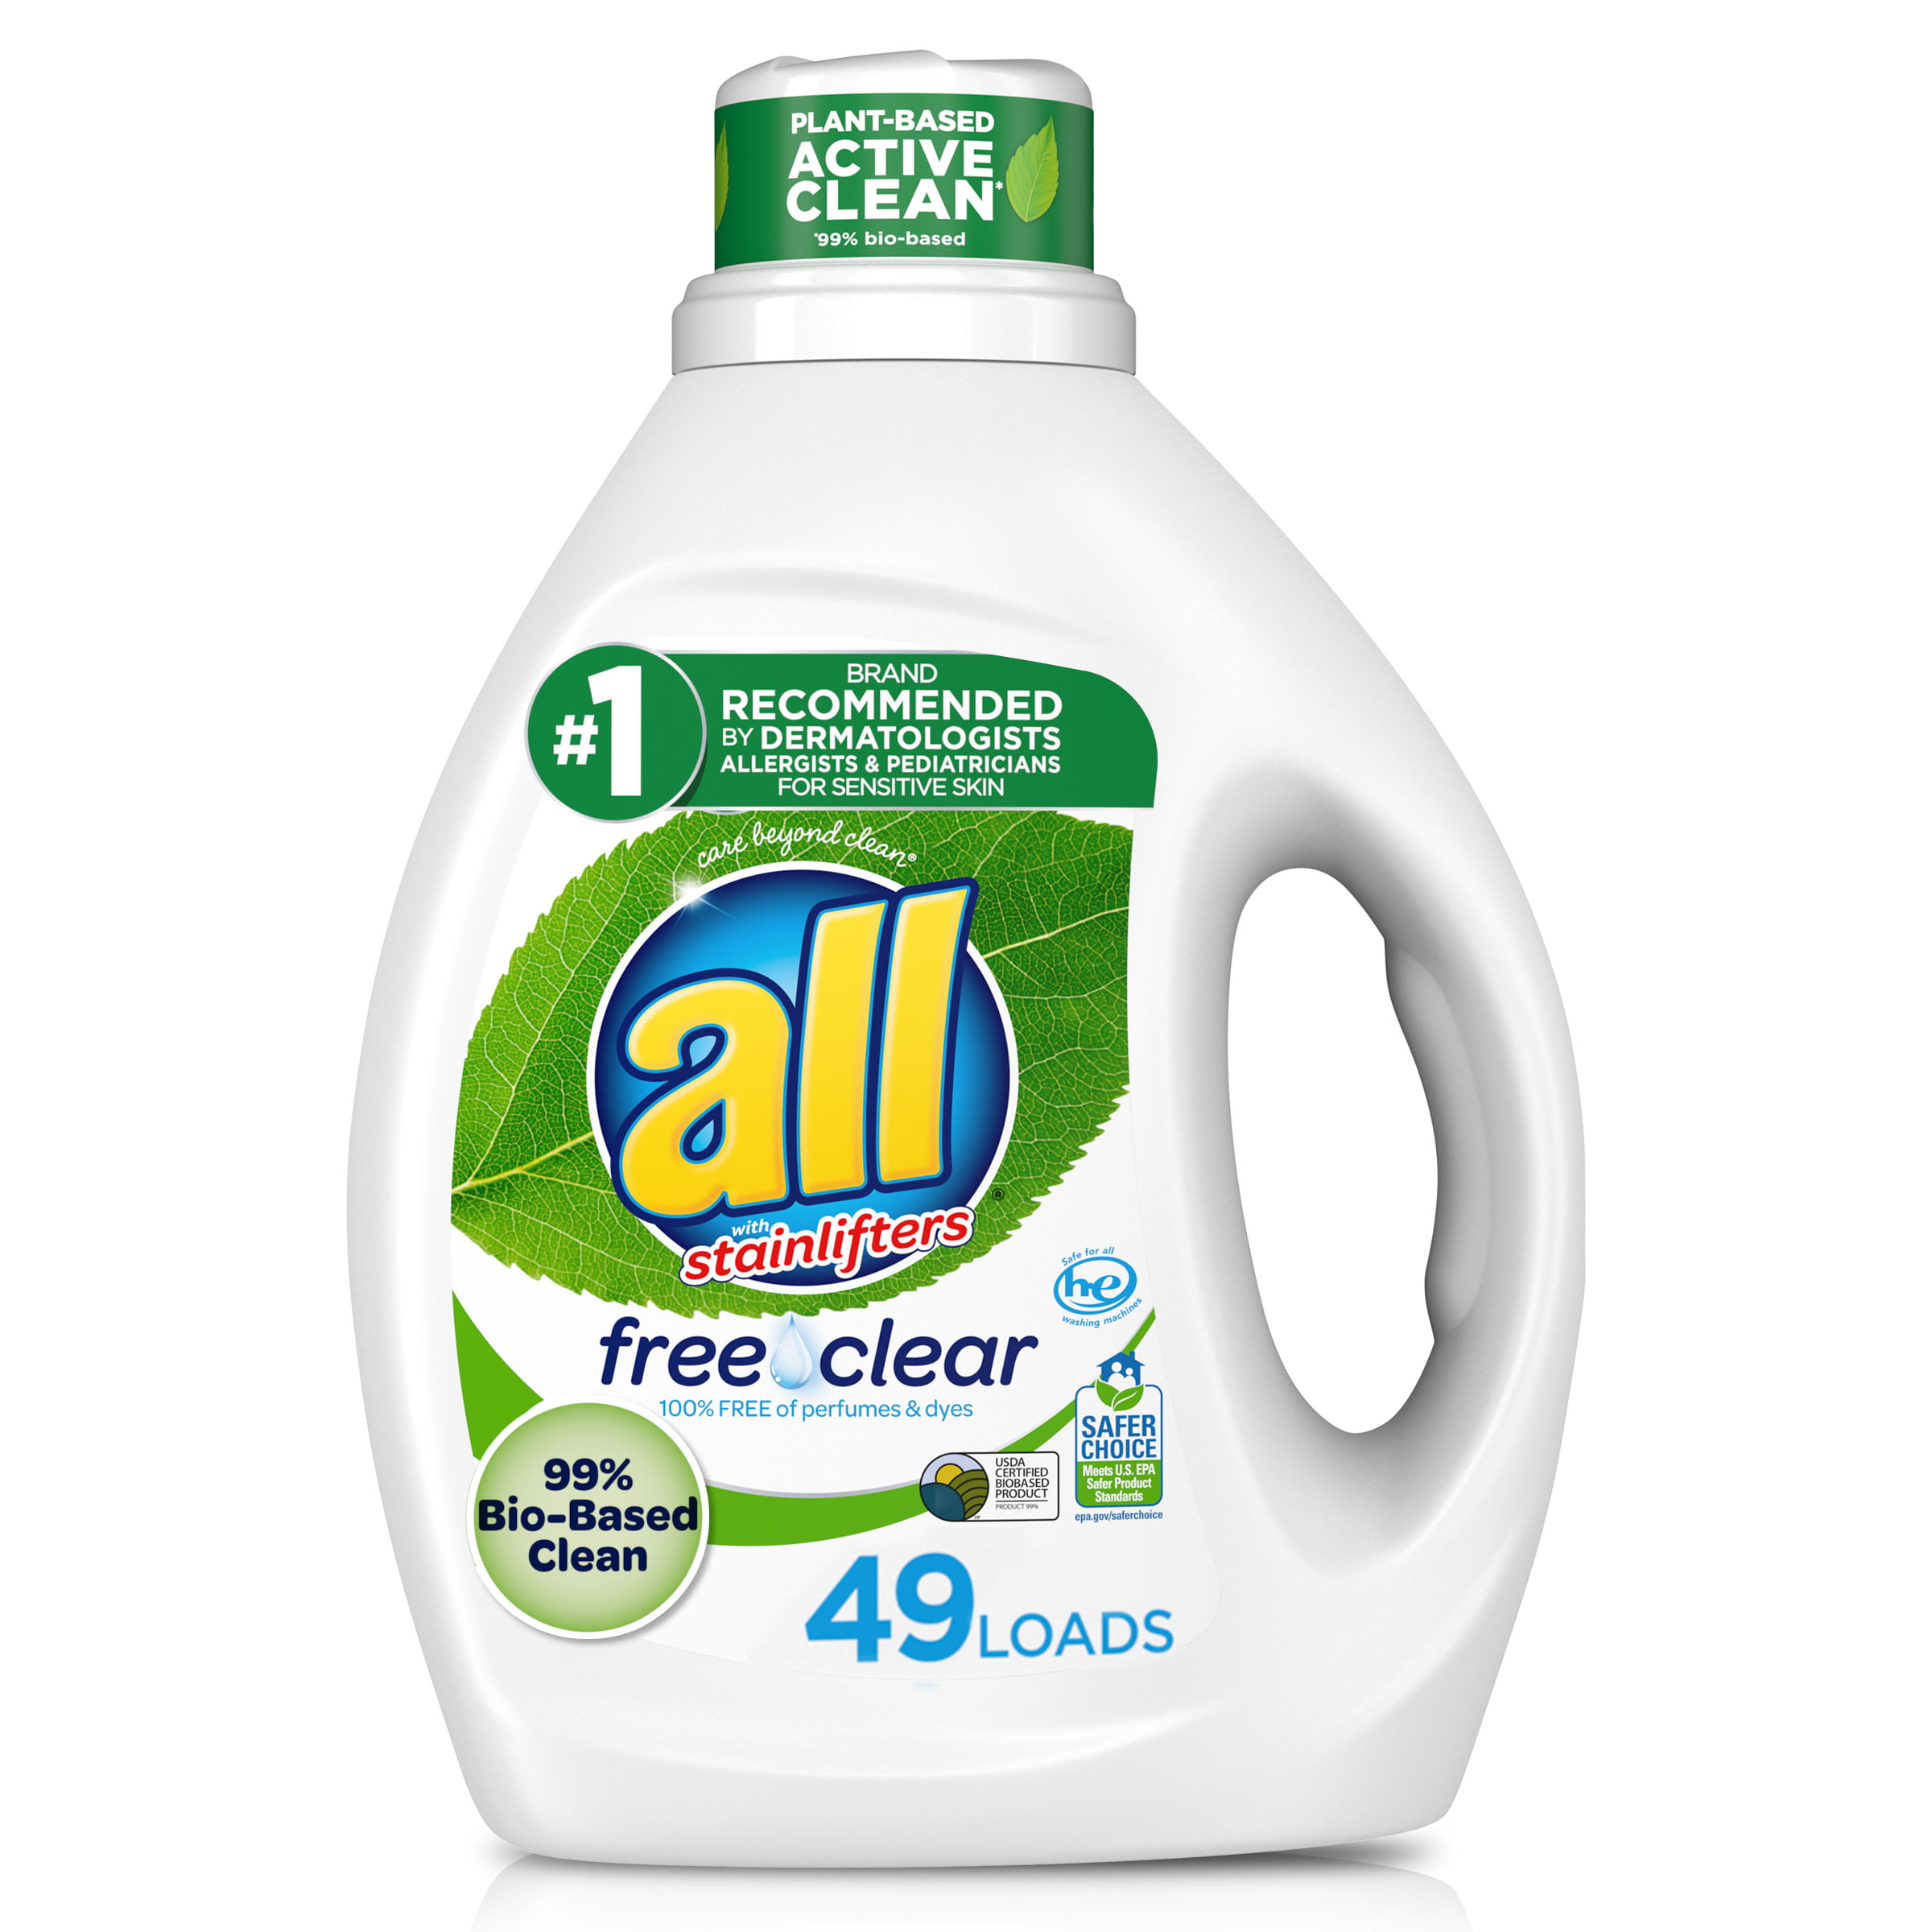 all-laundry-detergent-liquid-free-clear-eco-49-loads-99-bio-based